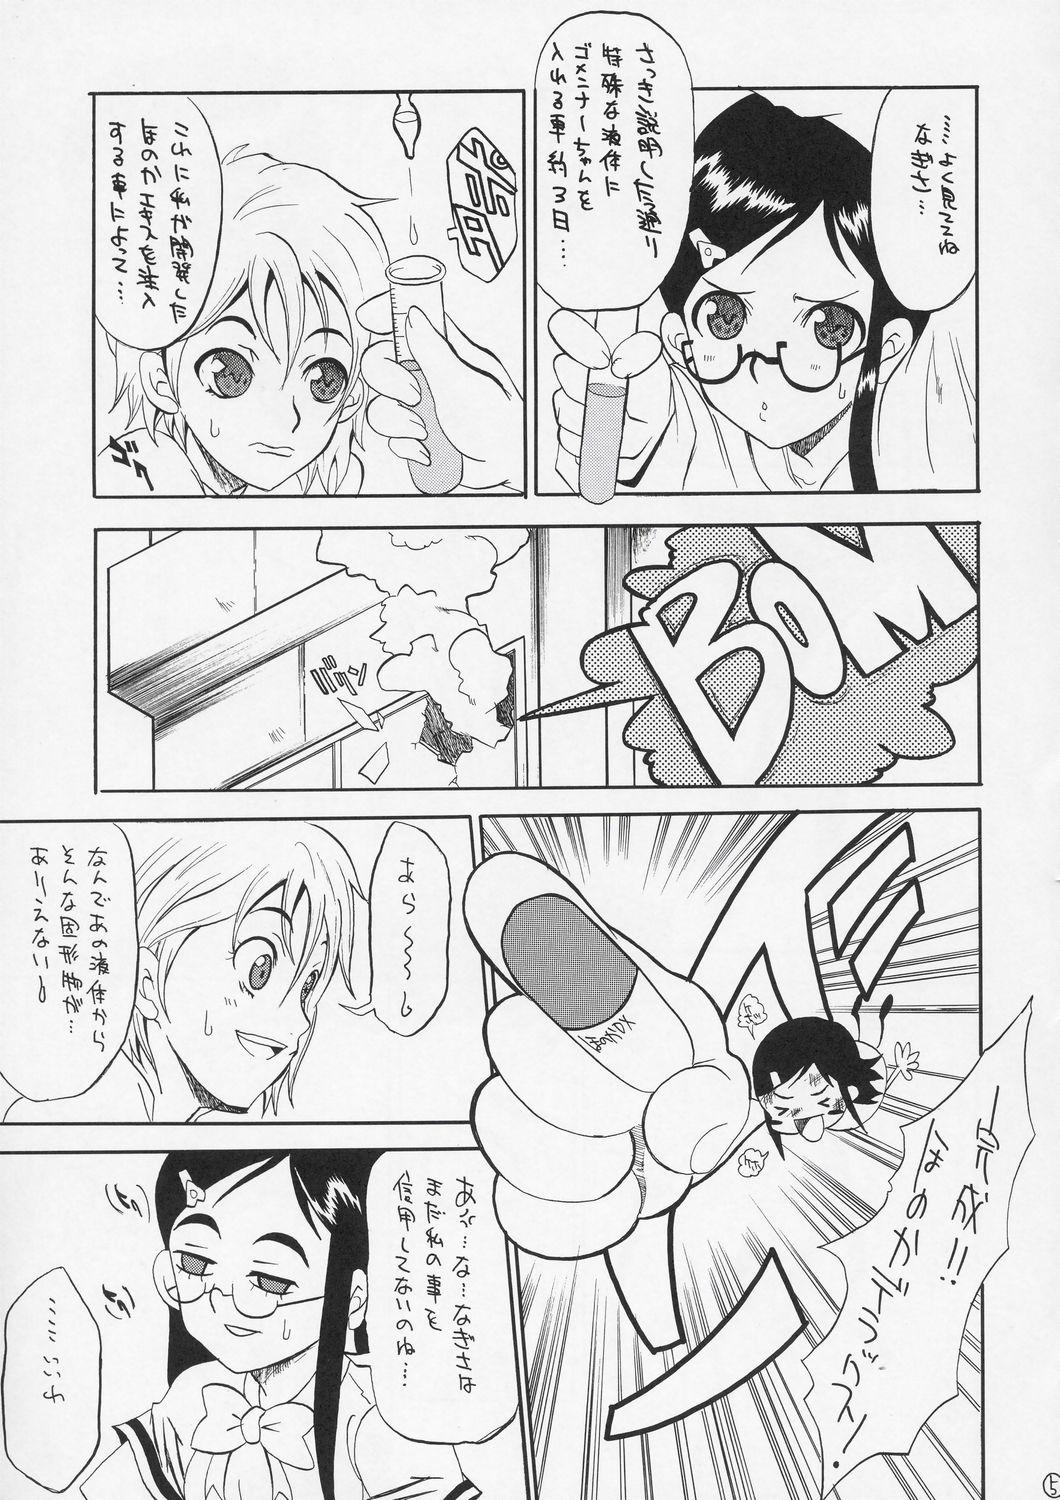 Fuck Puretty Cures - Pretty cure All - Page 4